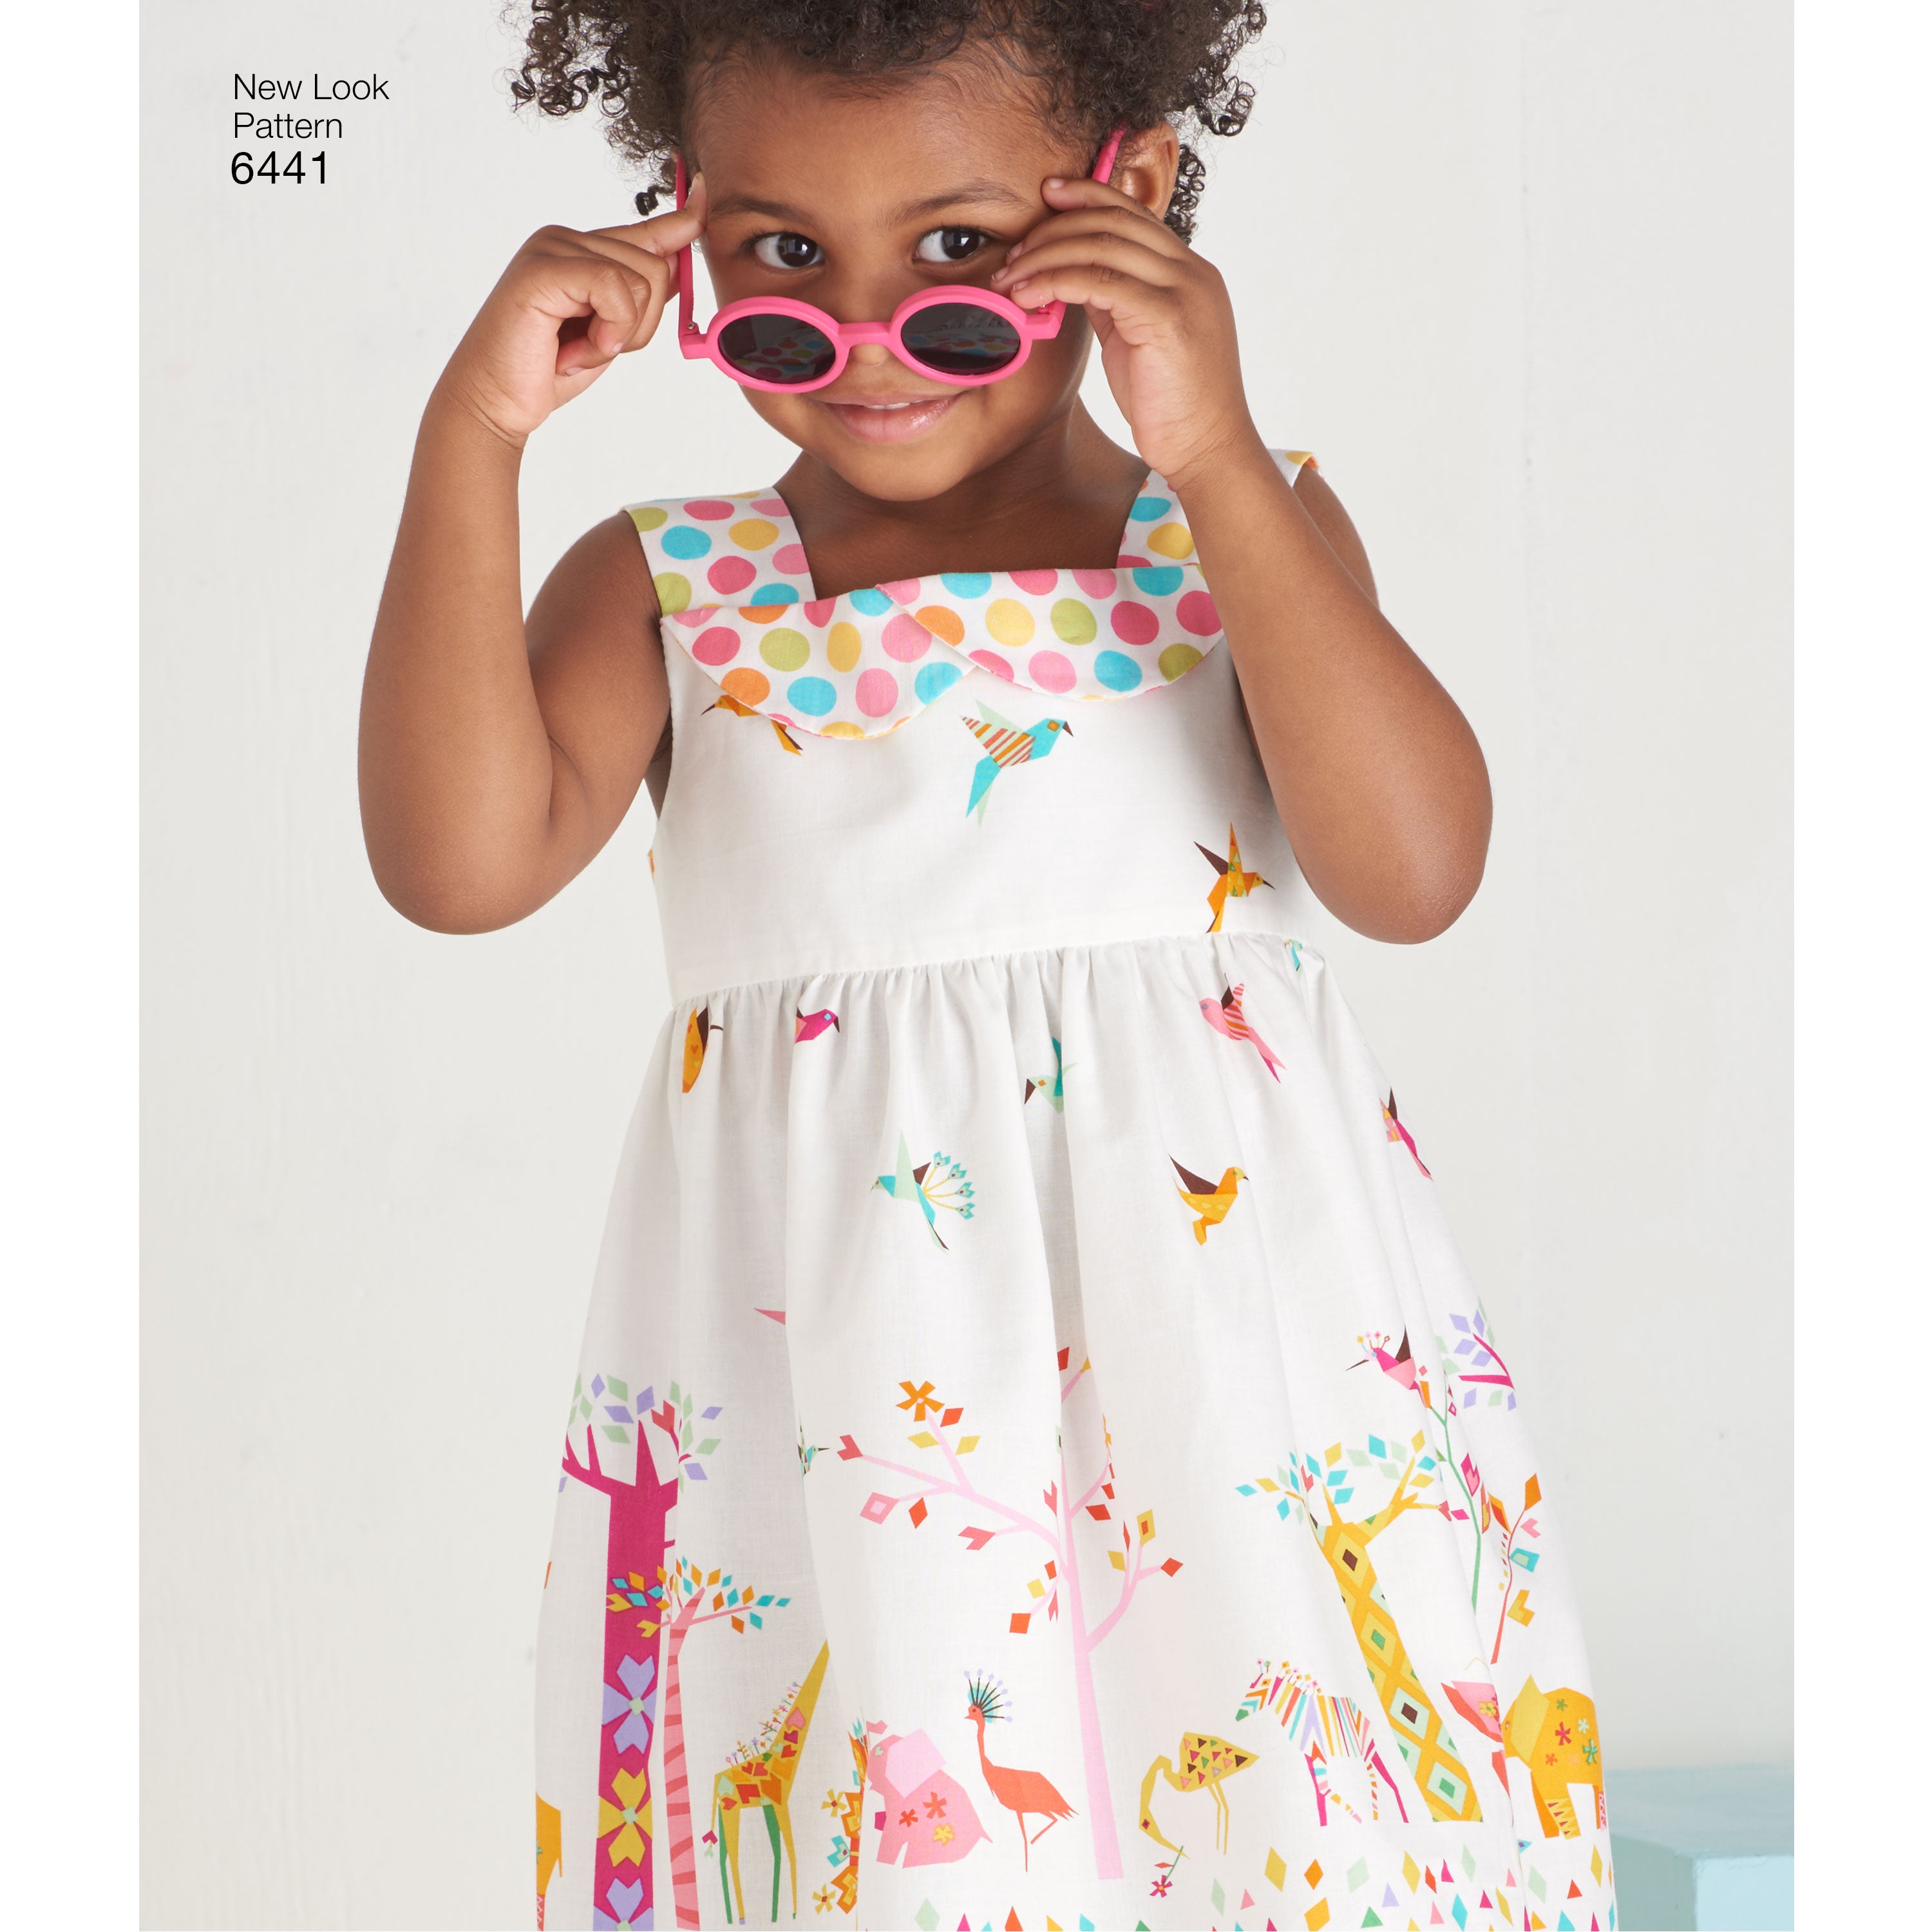 New Look Sewing Pattern 6441 - Toddlers' Easy Dresses, Top and Cropped ...